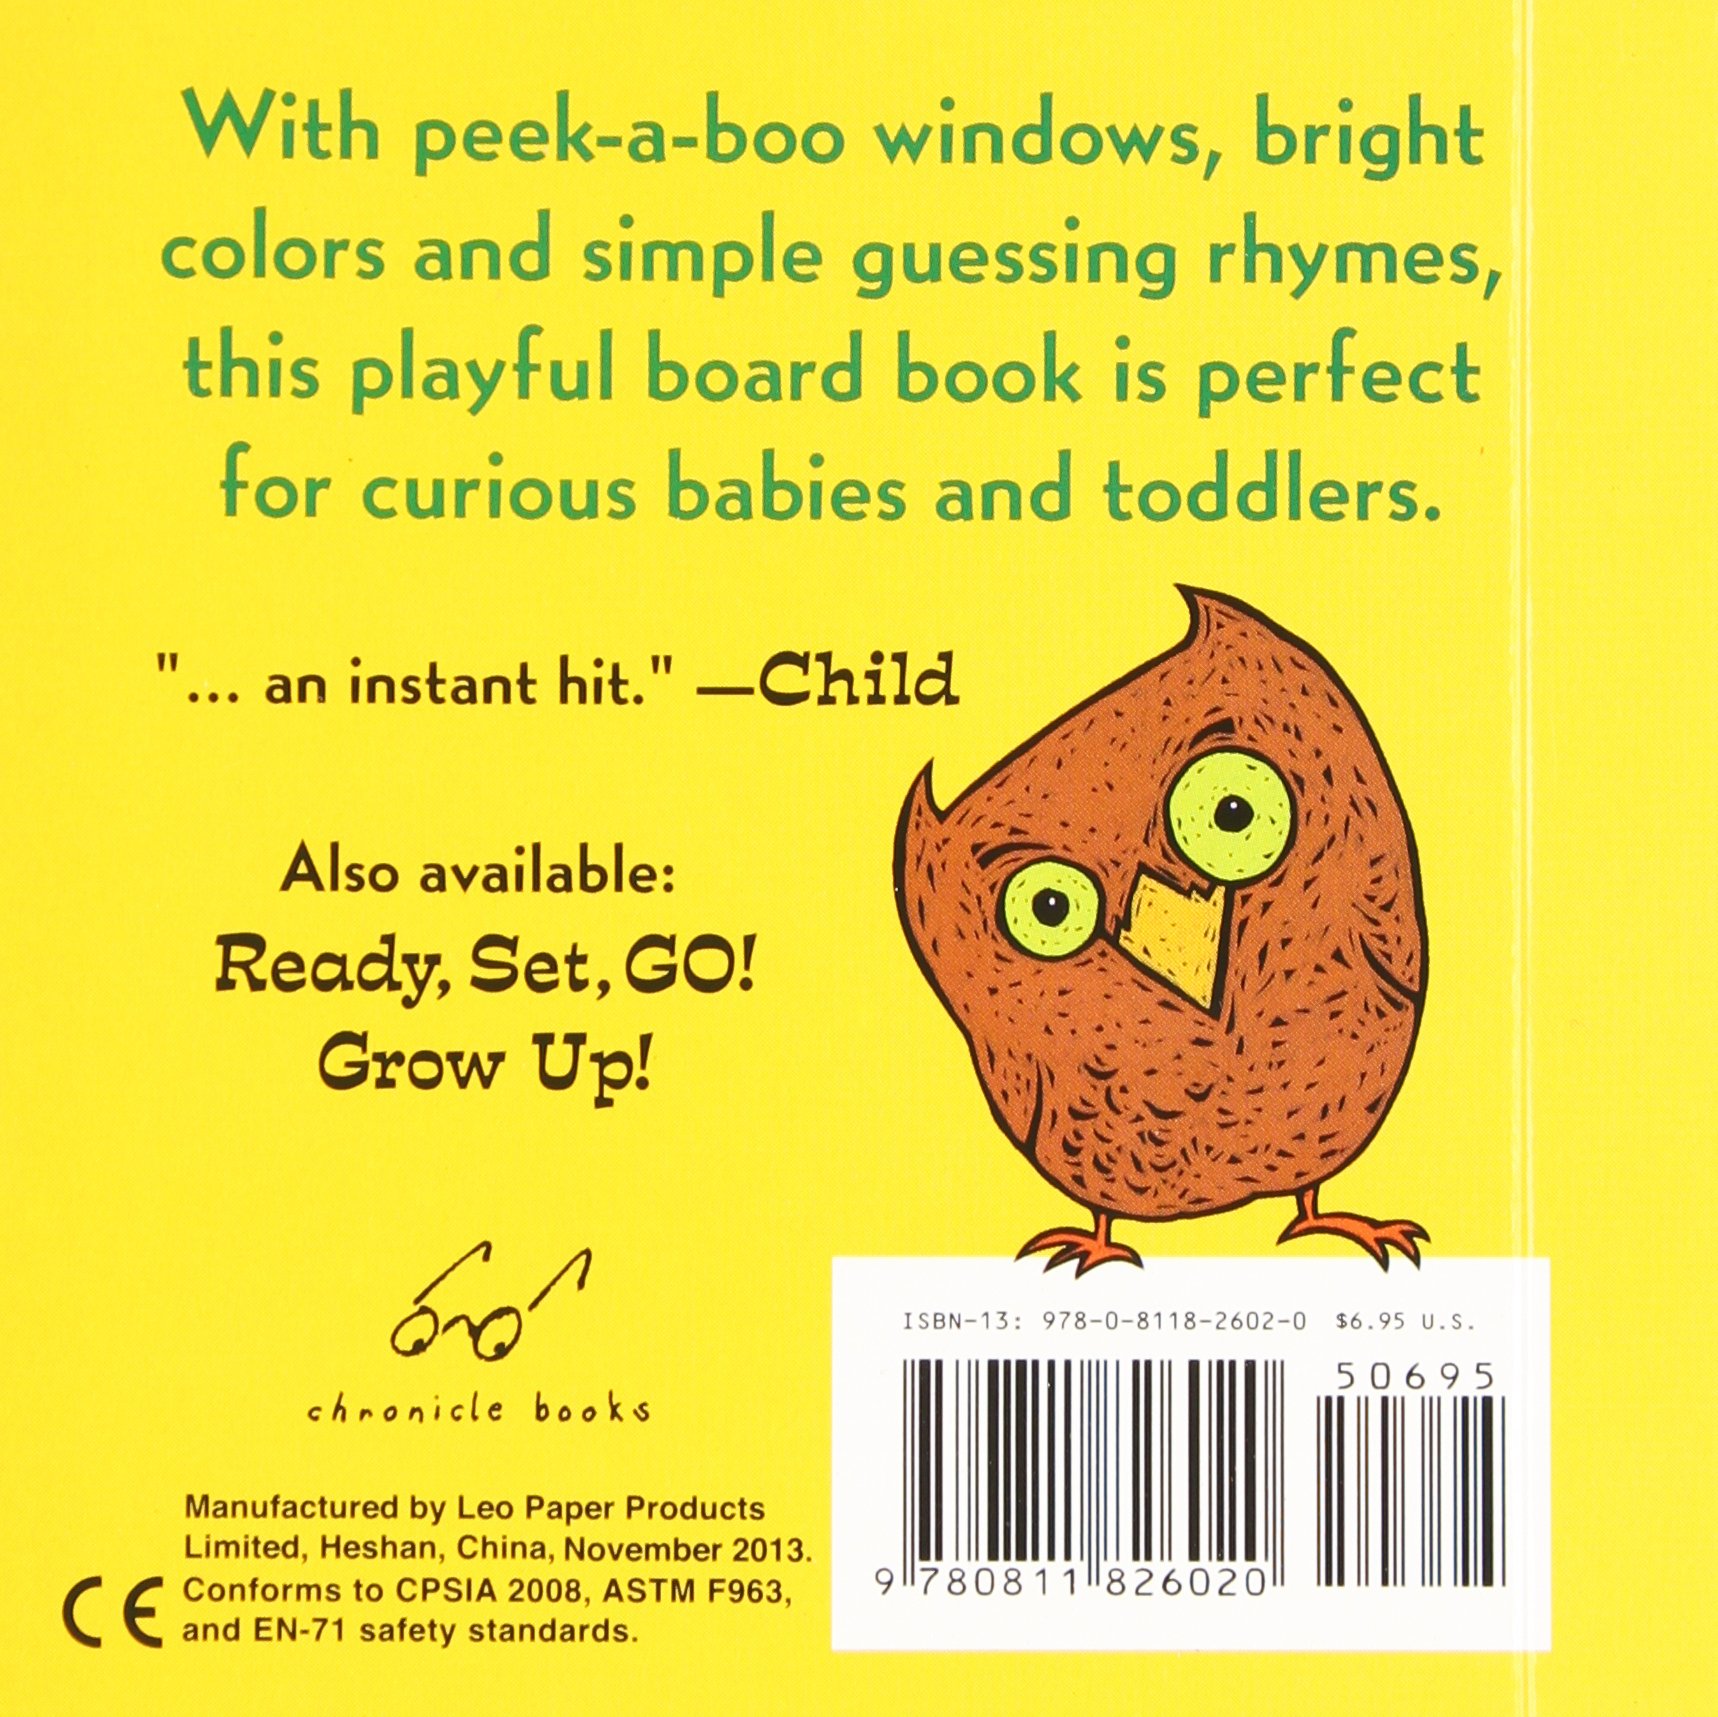 Peek-a Who? (Lift the Flap Books, Interactive Books for Kids, Interactive Read Aloud Books)